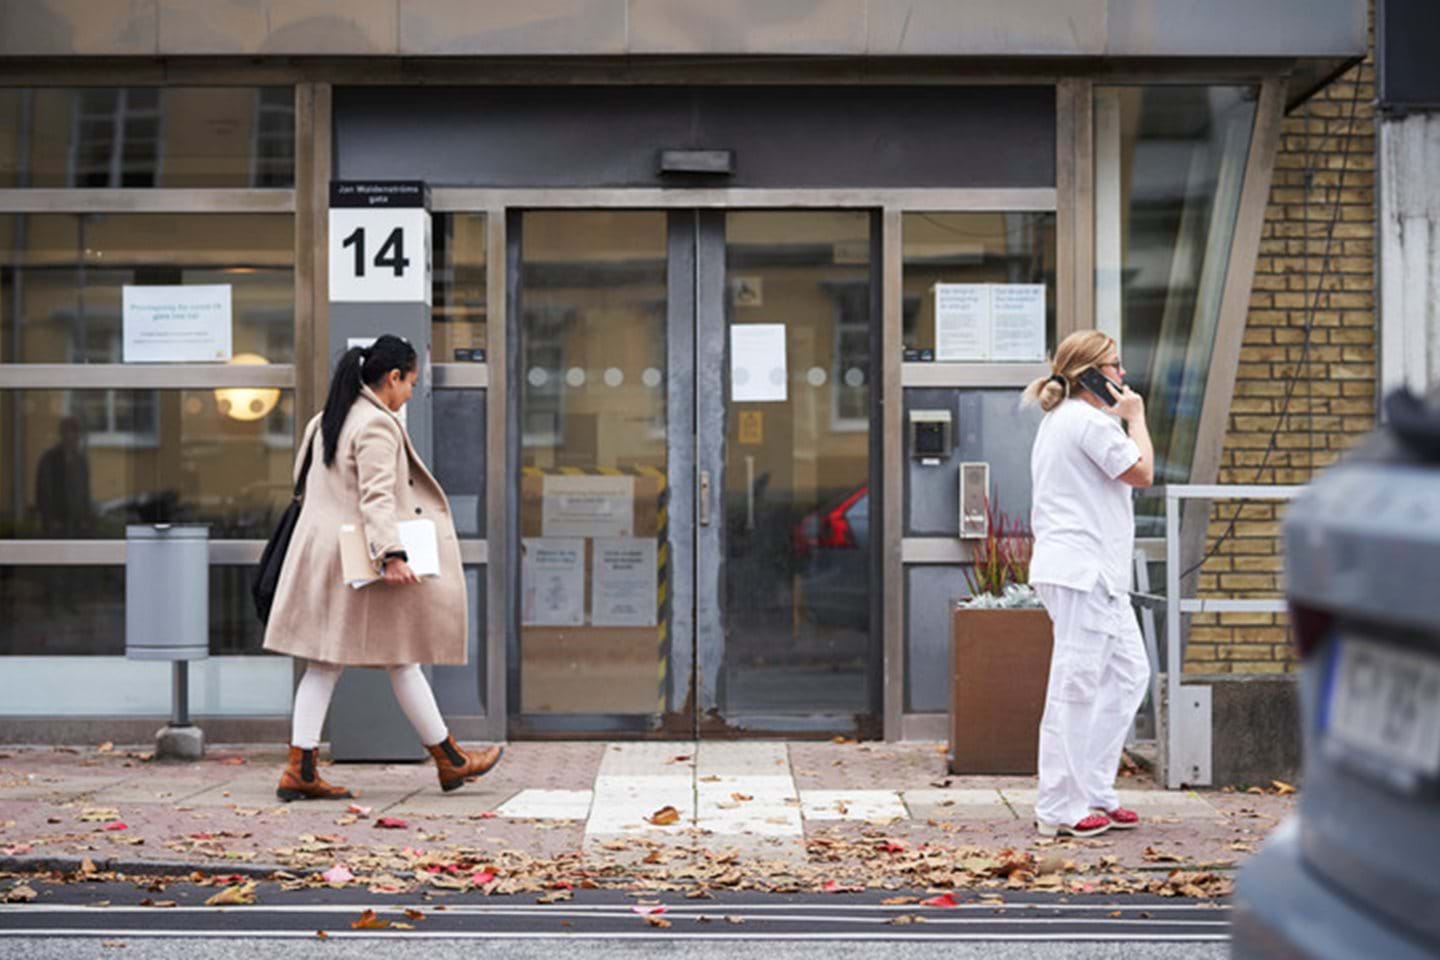 A woman walks into her office from the street as a nurse stands nearby talking on the phone.